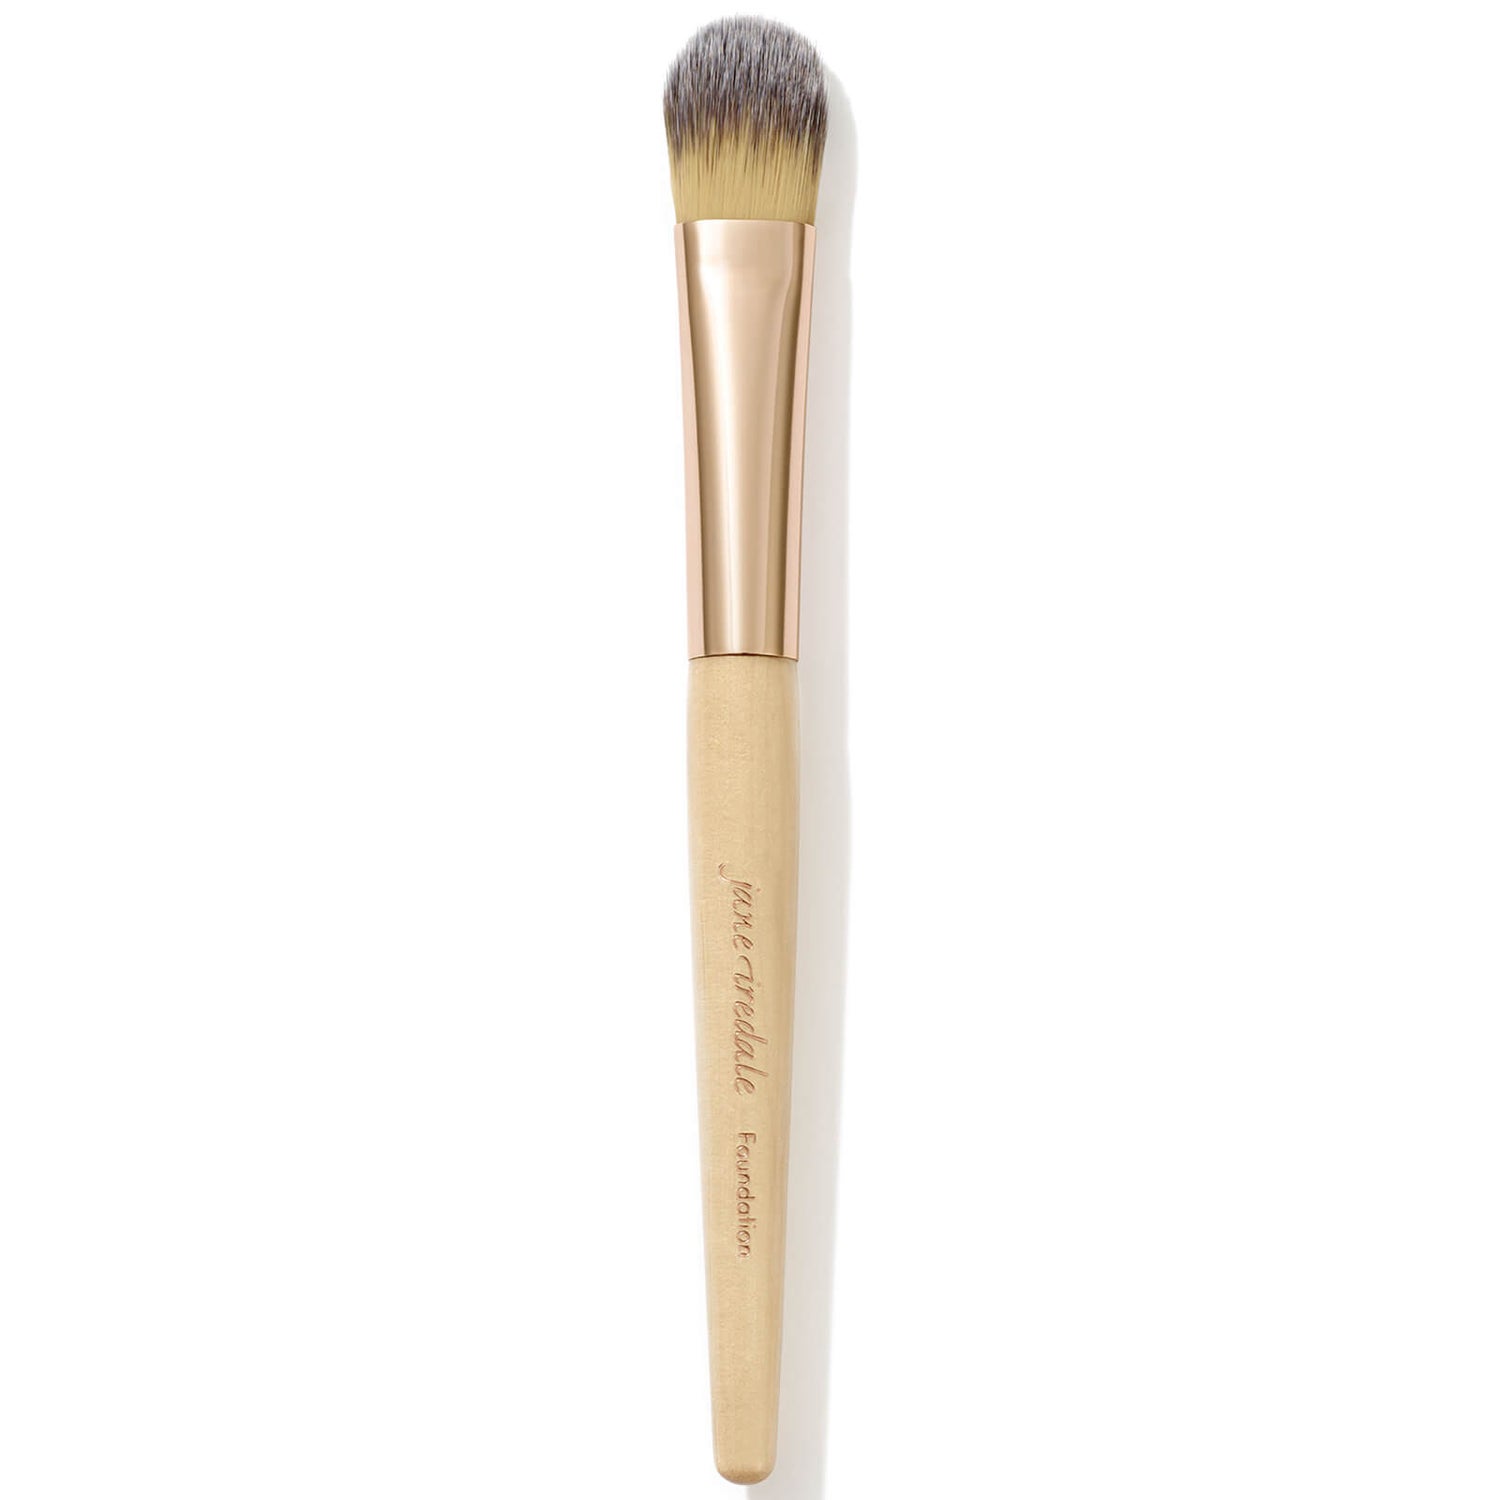 L.A. Colors Tapered Blending Brush, 1 Piece